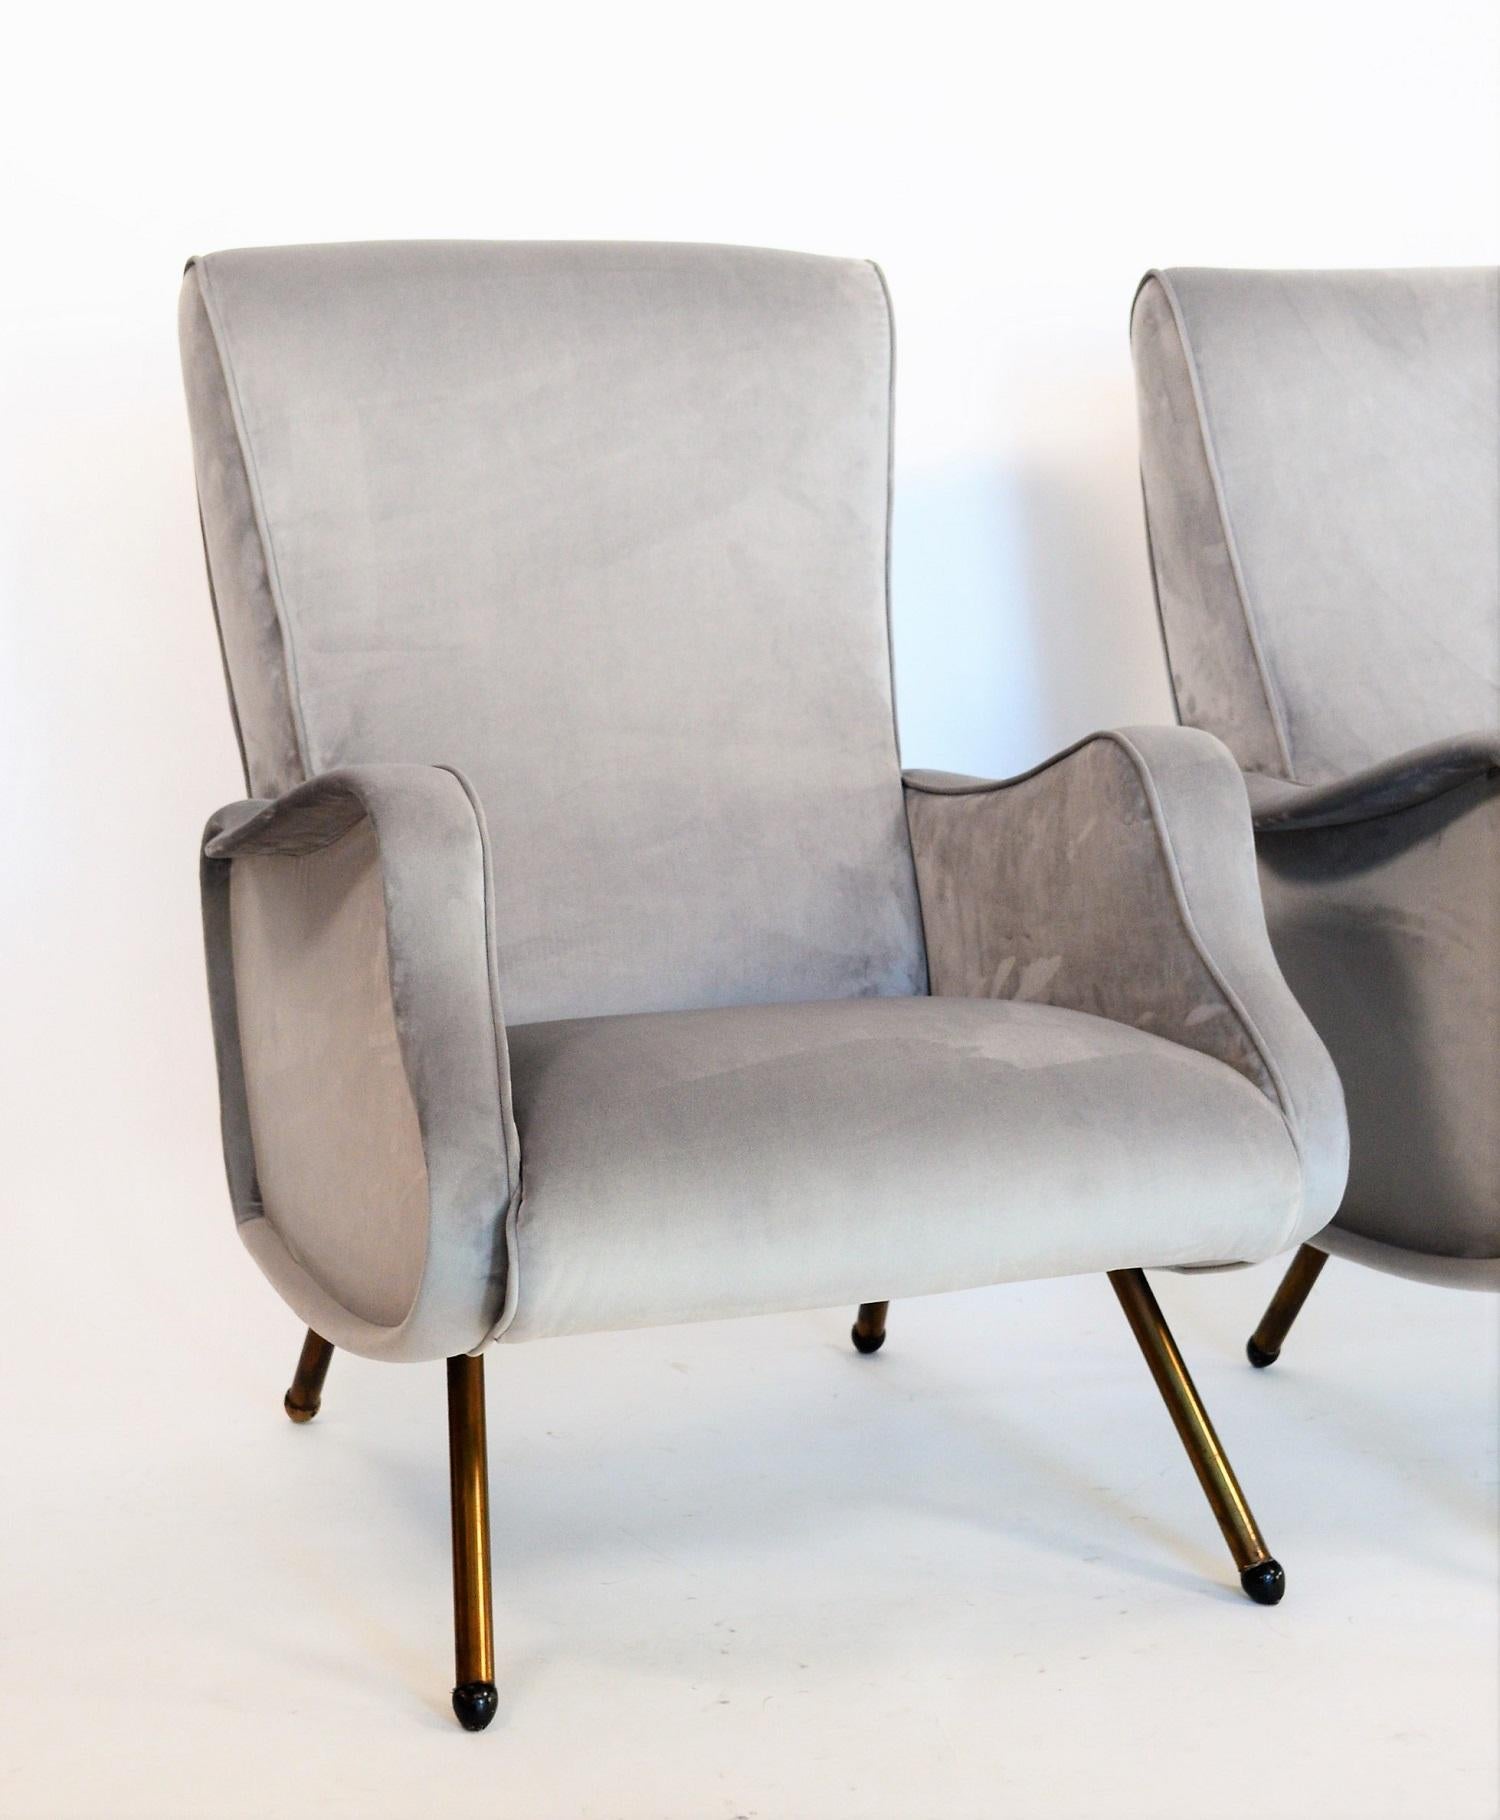 Italian Midcentury Armchairs Restored and Reupholstered in Grey Velvet, 1950s 1